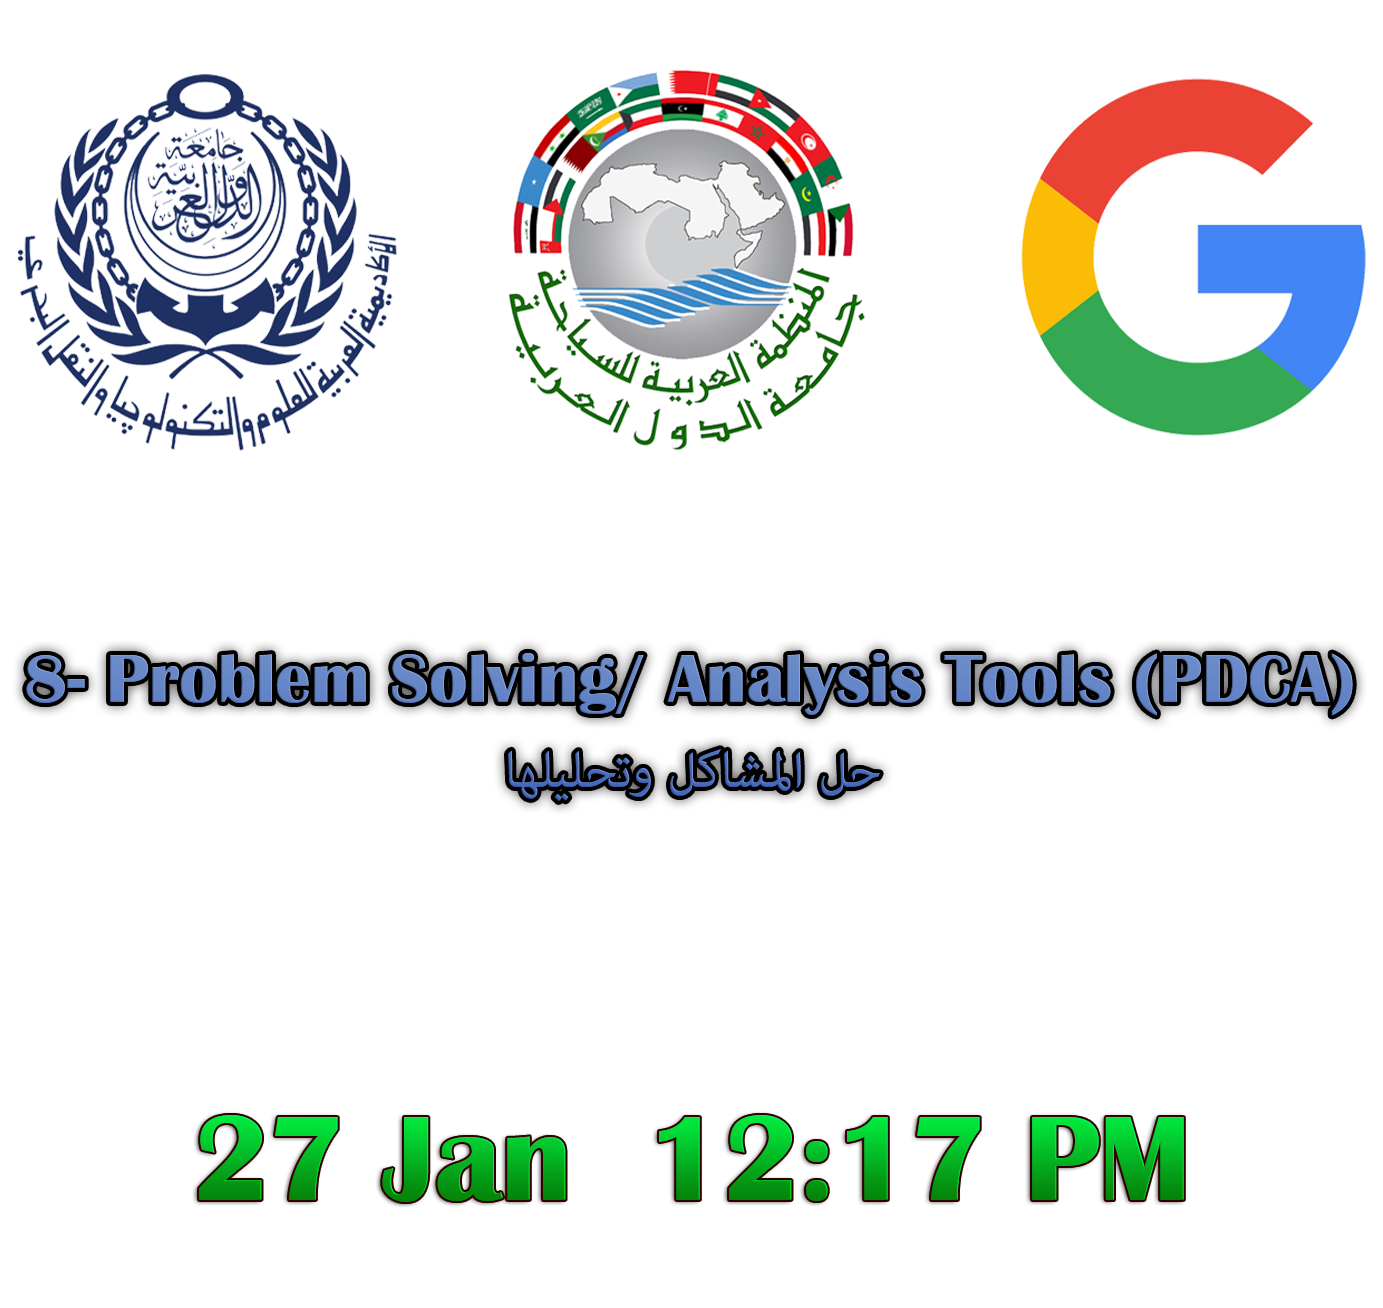 Problem Solving/ Analysis Tools Course